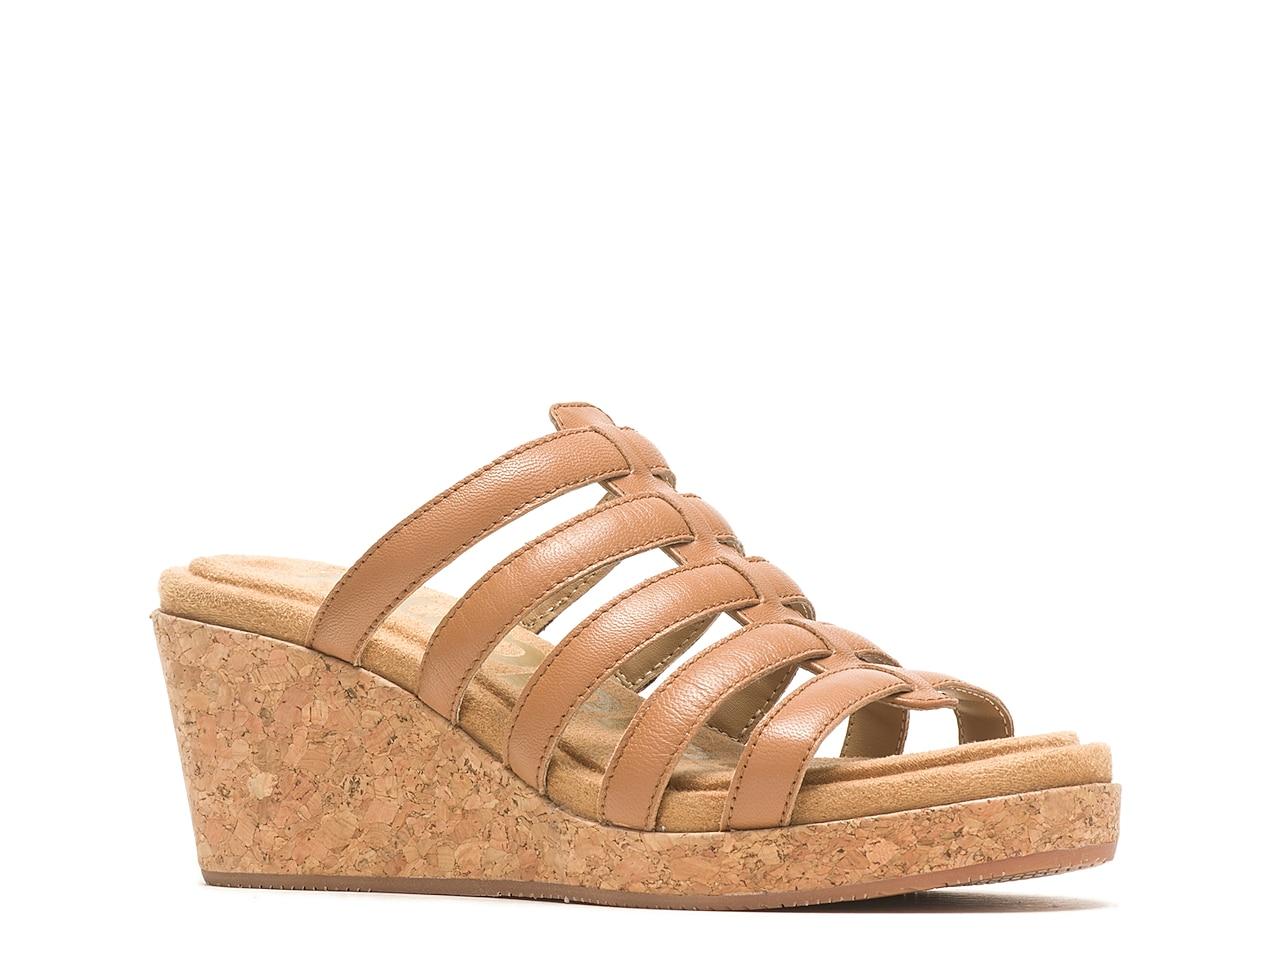 Hush Puppies Willow Fisherman Wedge Sandal in Natural | Lyst